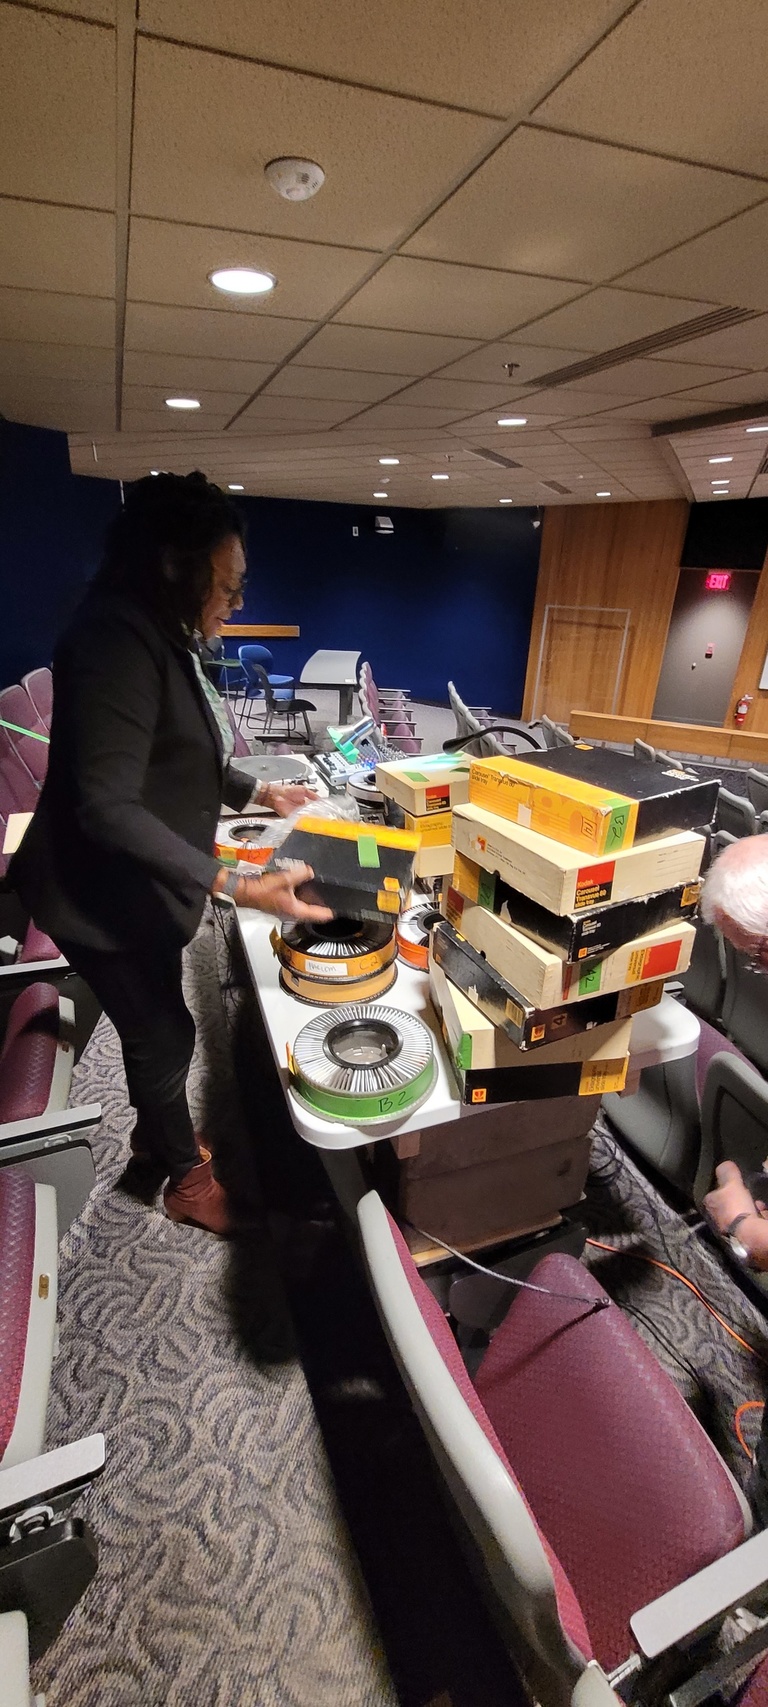 A women organizing the vinyl reocrds on the table